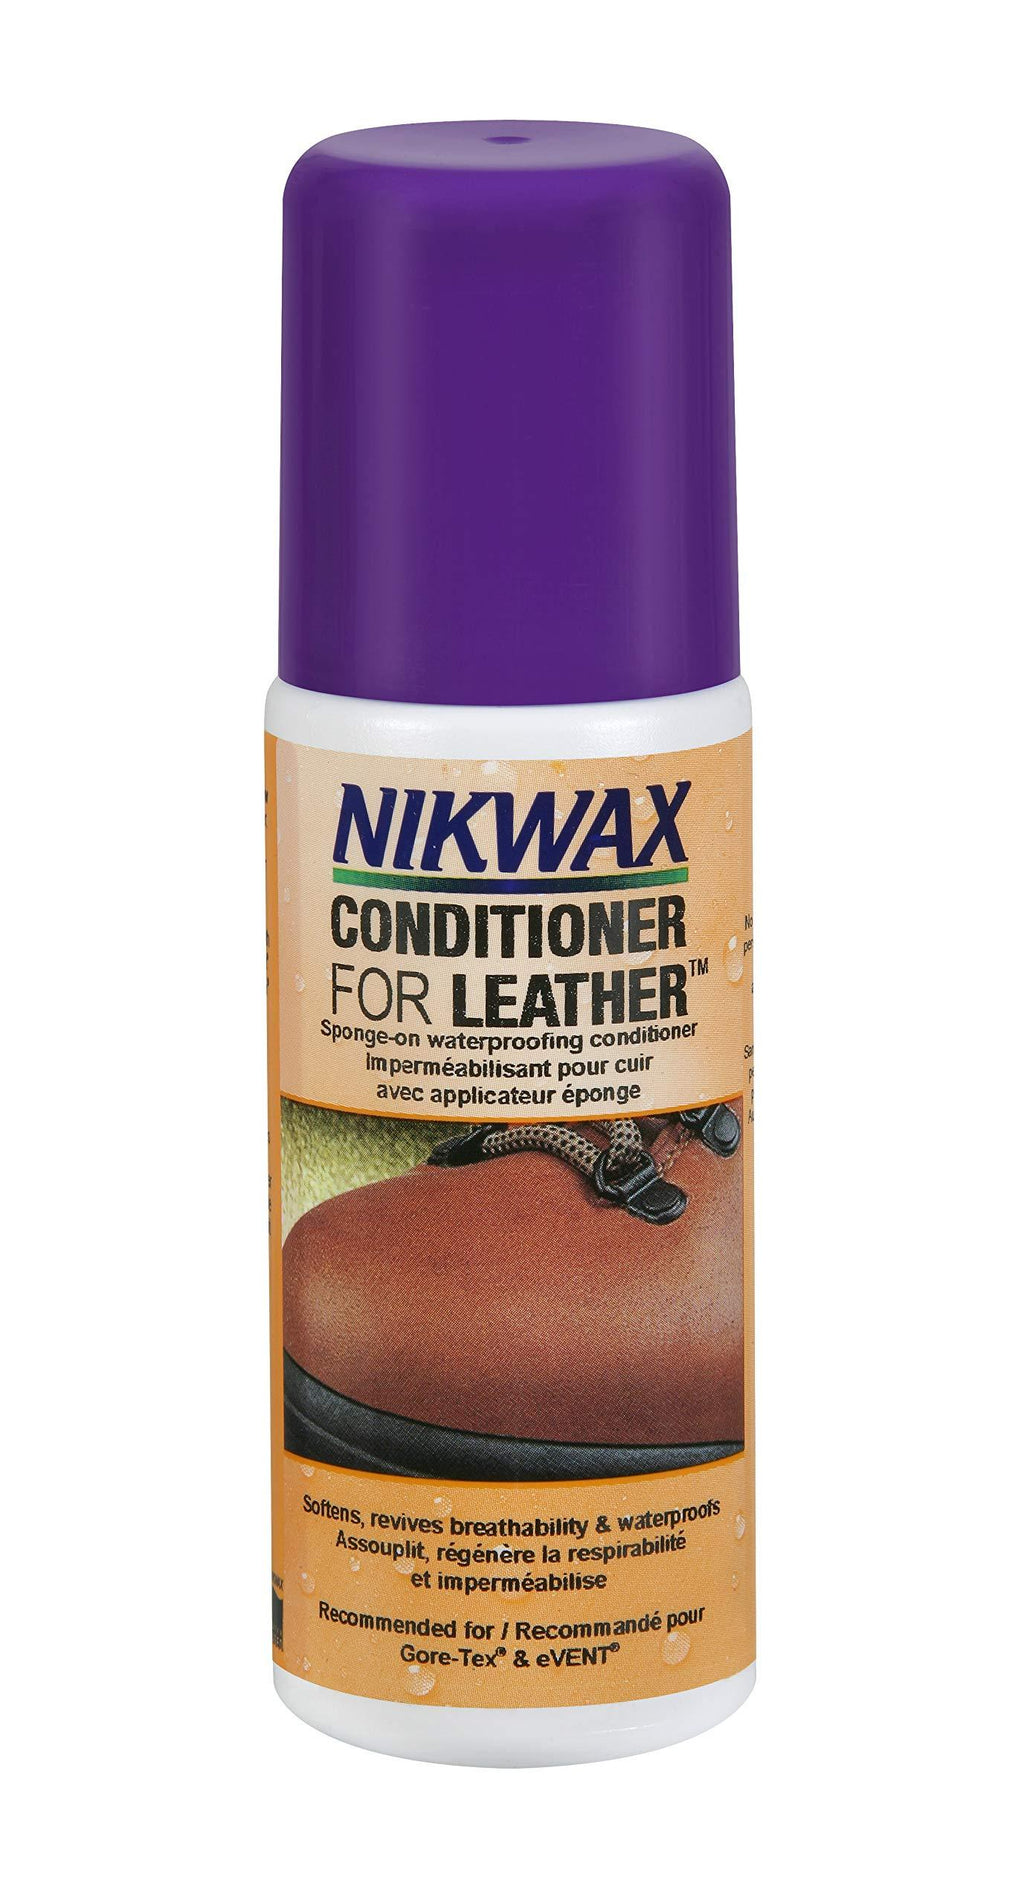  [AUSTRALIA] - Nikwax Conditioner for Leather